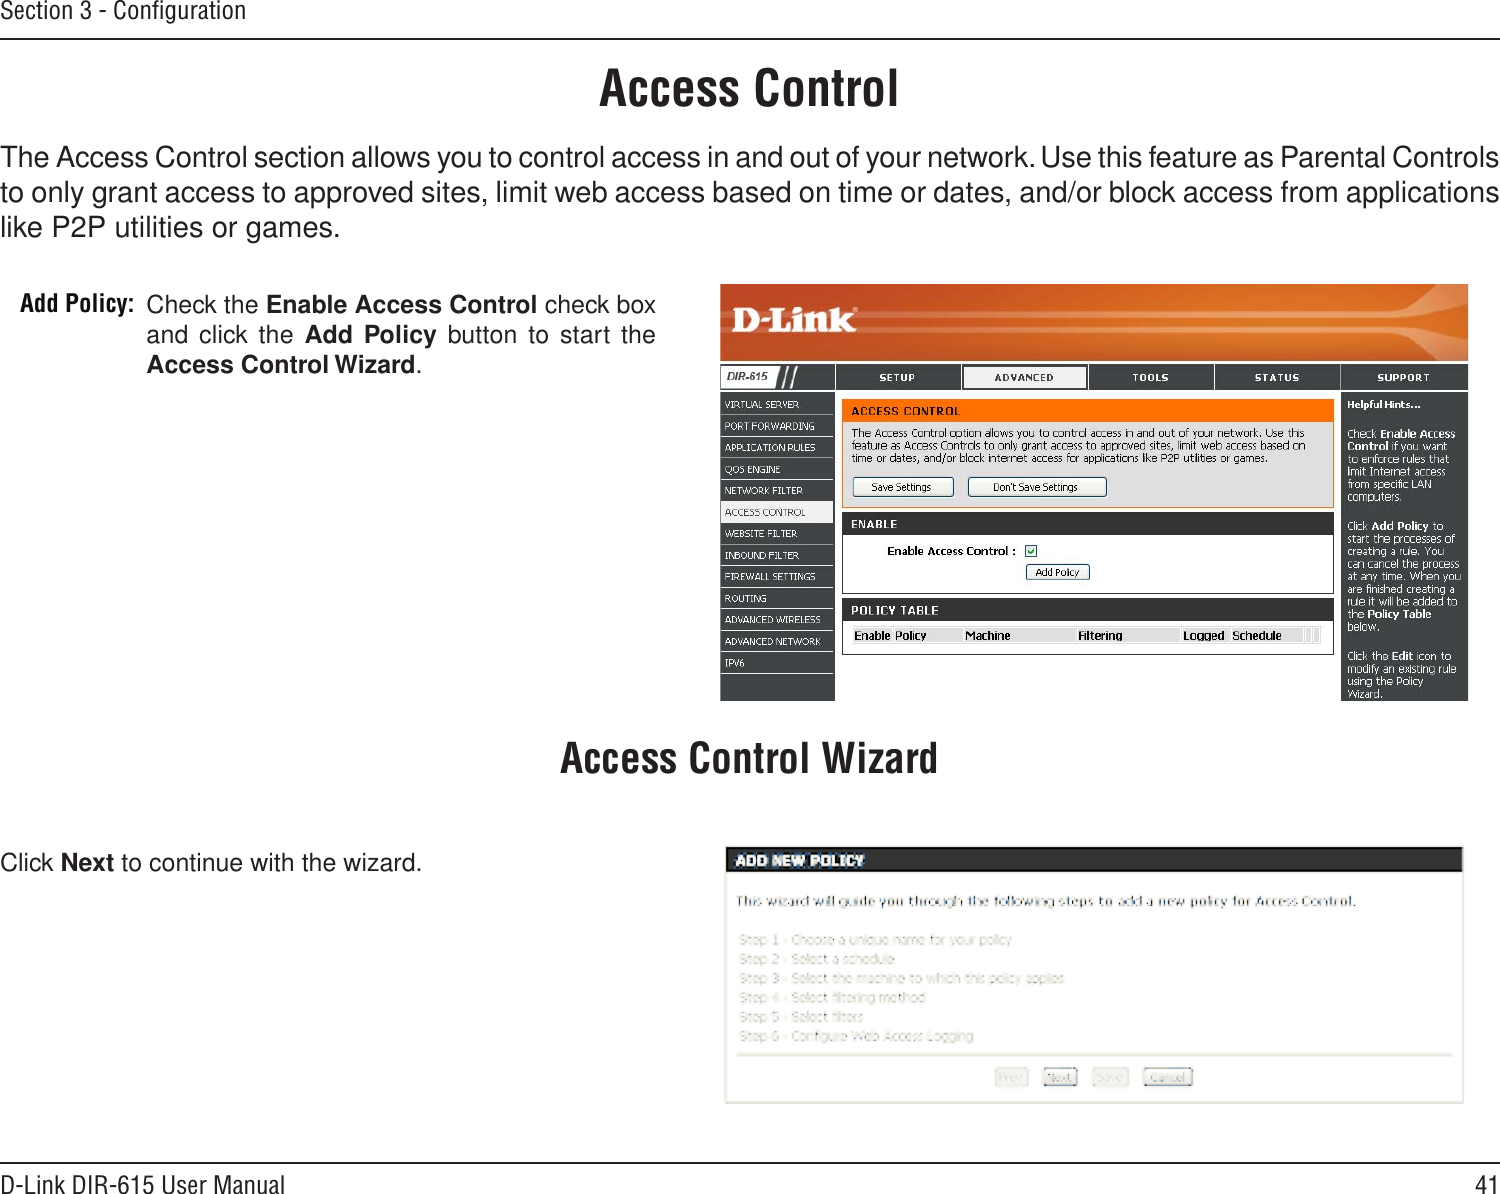 41D-Link DIR-615 User ManualSection 3 - ConﬁgurationAccess ControlCheck the Enable Access Control check box and click the  Add Policy button to start the Access Control Wizard. Add Policy:The Access Control section allows you to control access in and out of your network. Use this feature as Parental Controls to only grant access to approved sites, limit web access based on time or dates, and/or block access from applications like P2P utilities or games.Click Next to continue with the wizard.Access Control Wizard